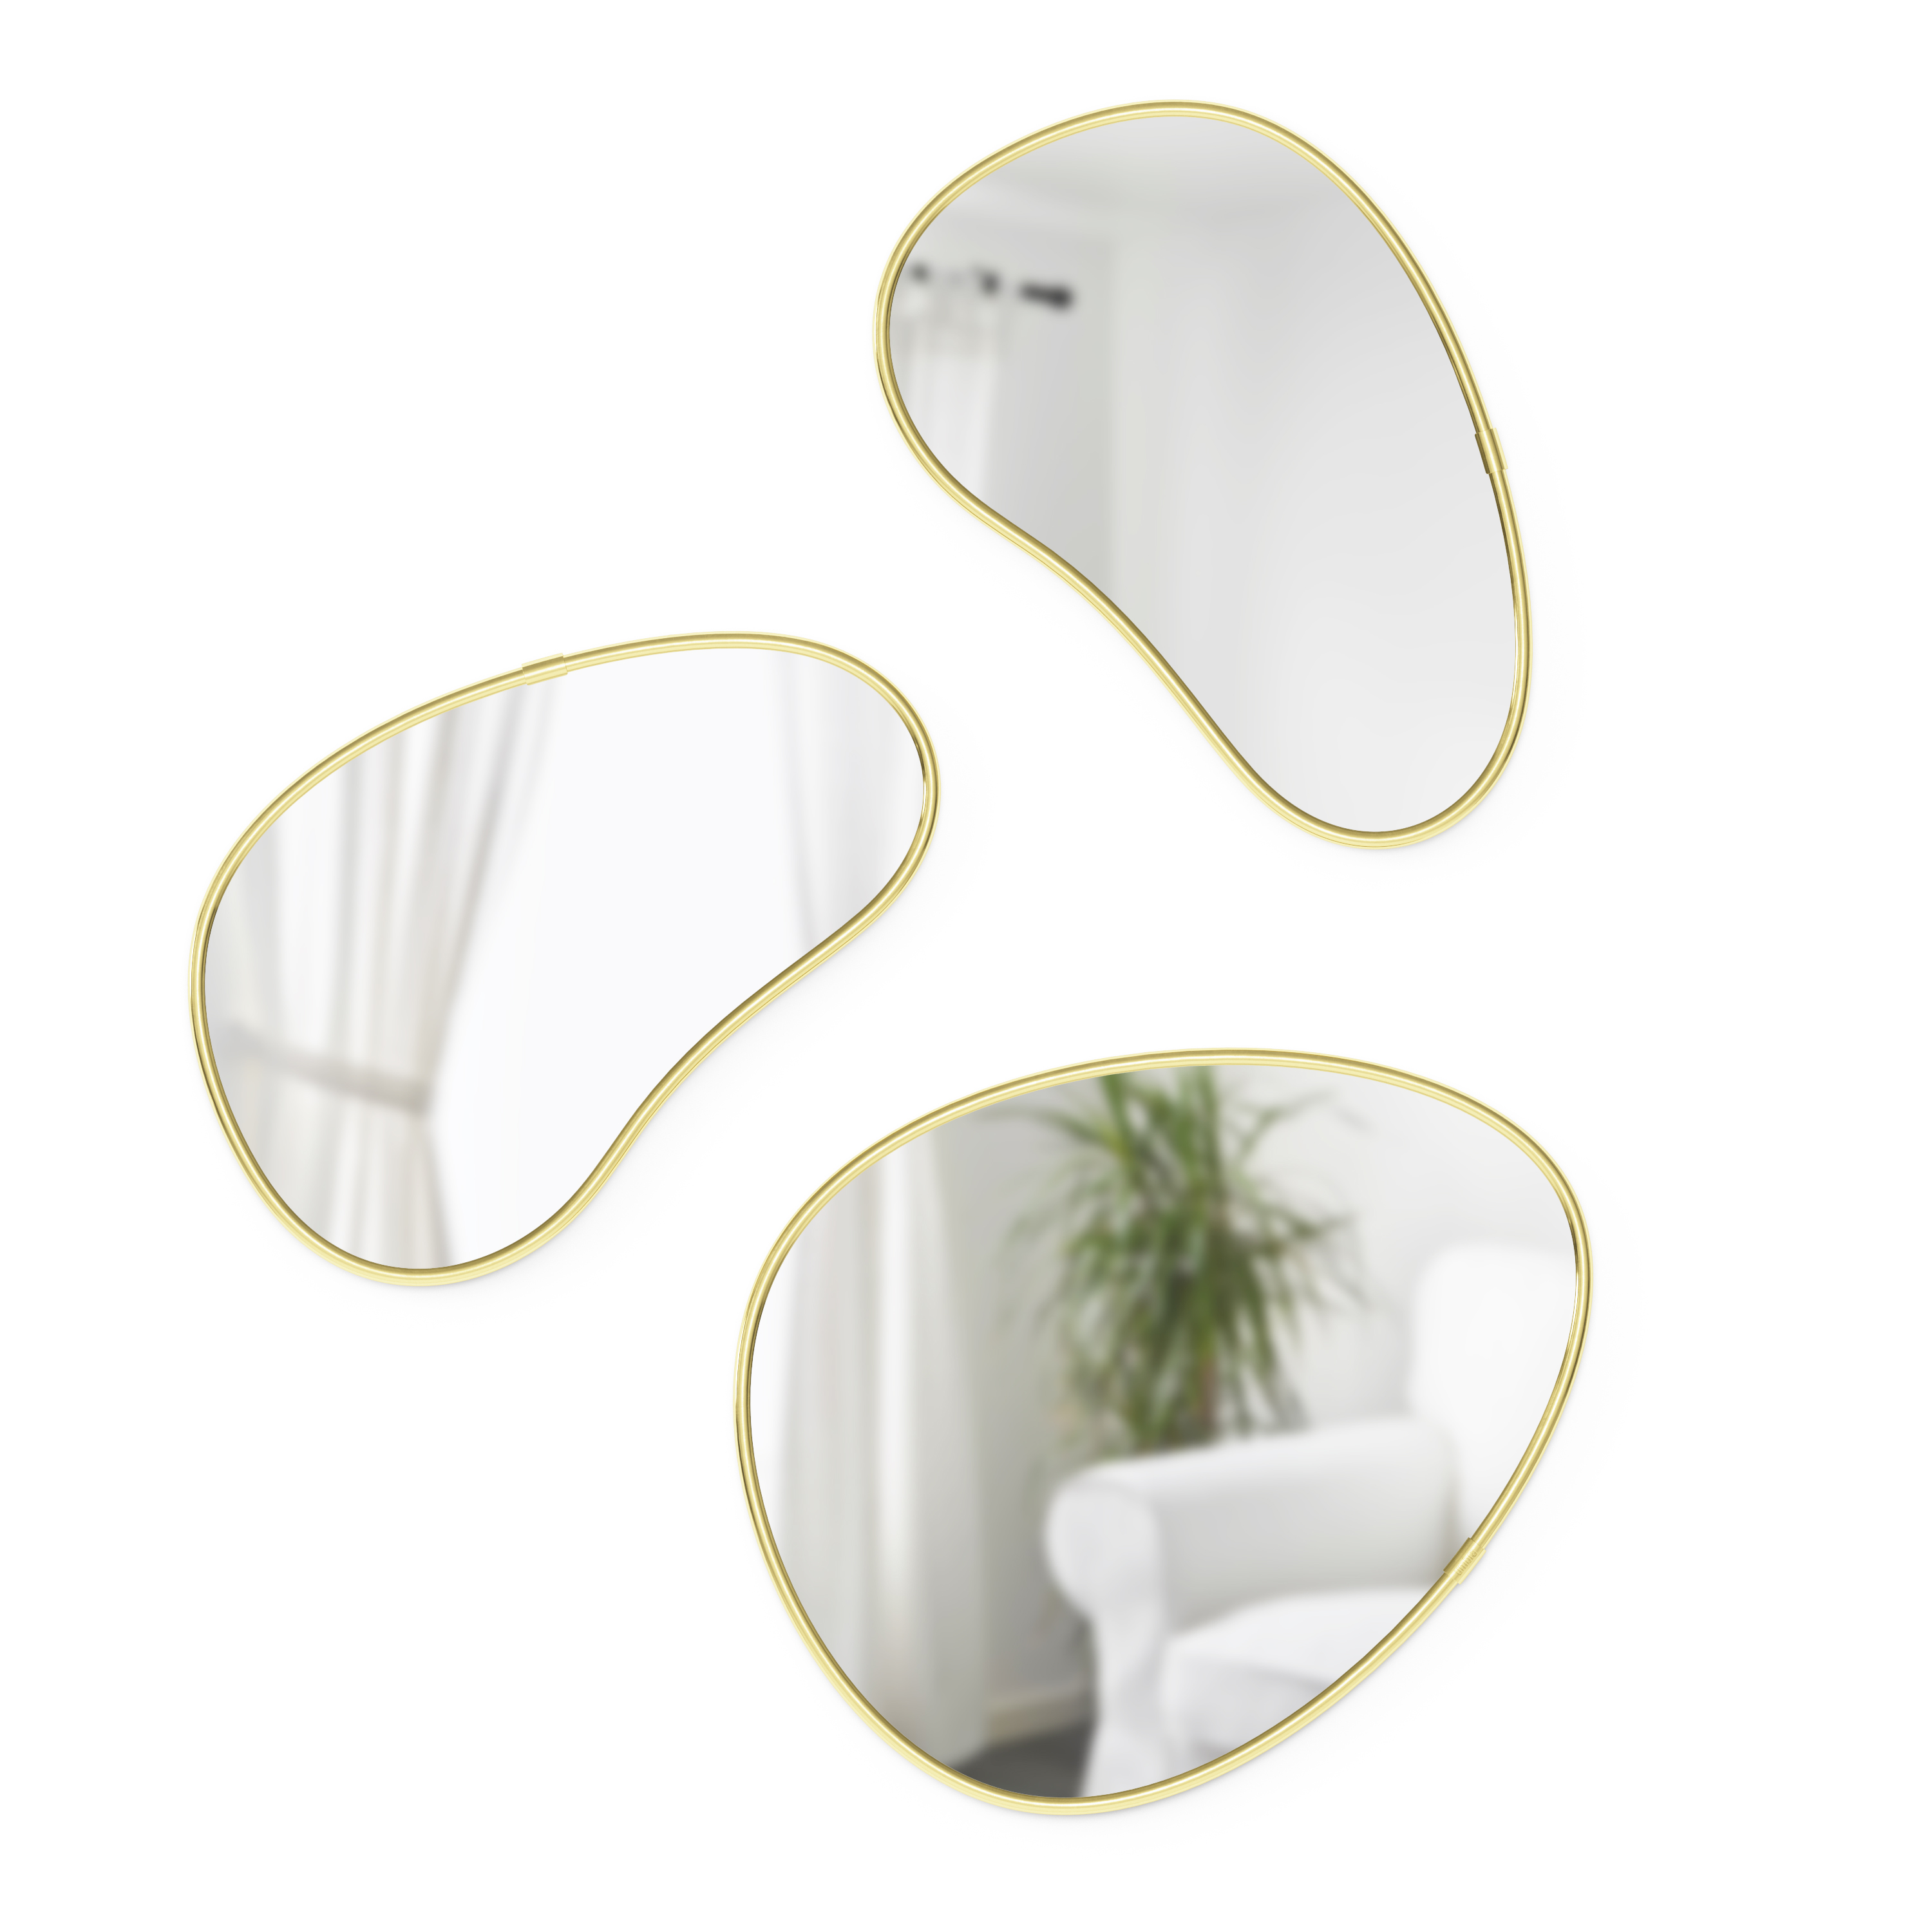 Umbra Set of 3 Hubba Pebble Wall Mirrors with Brass Finish